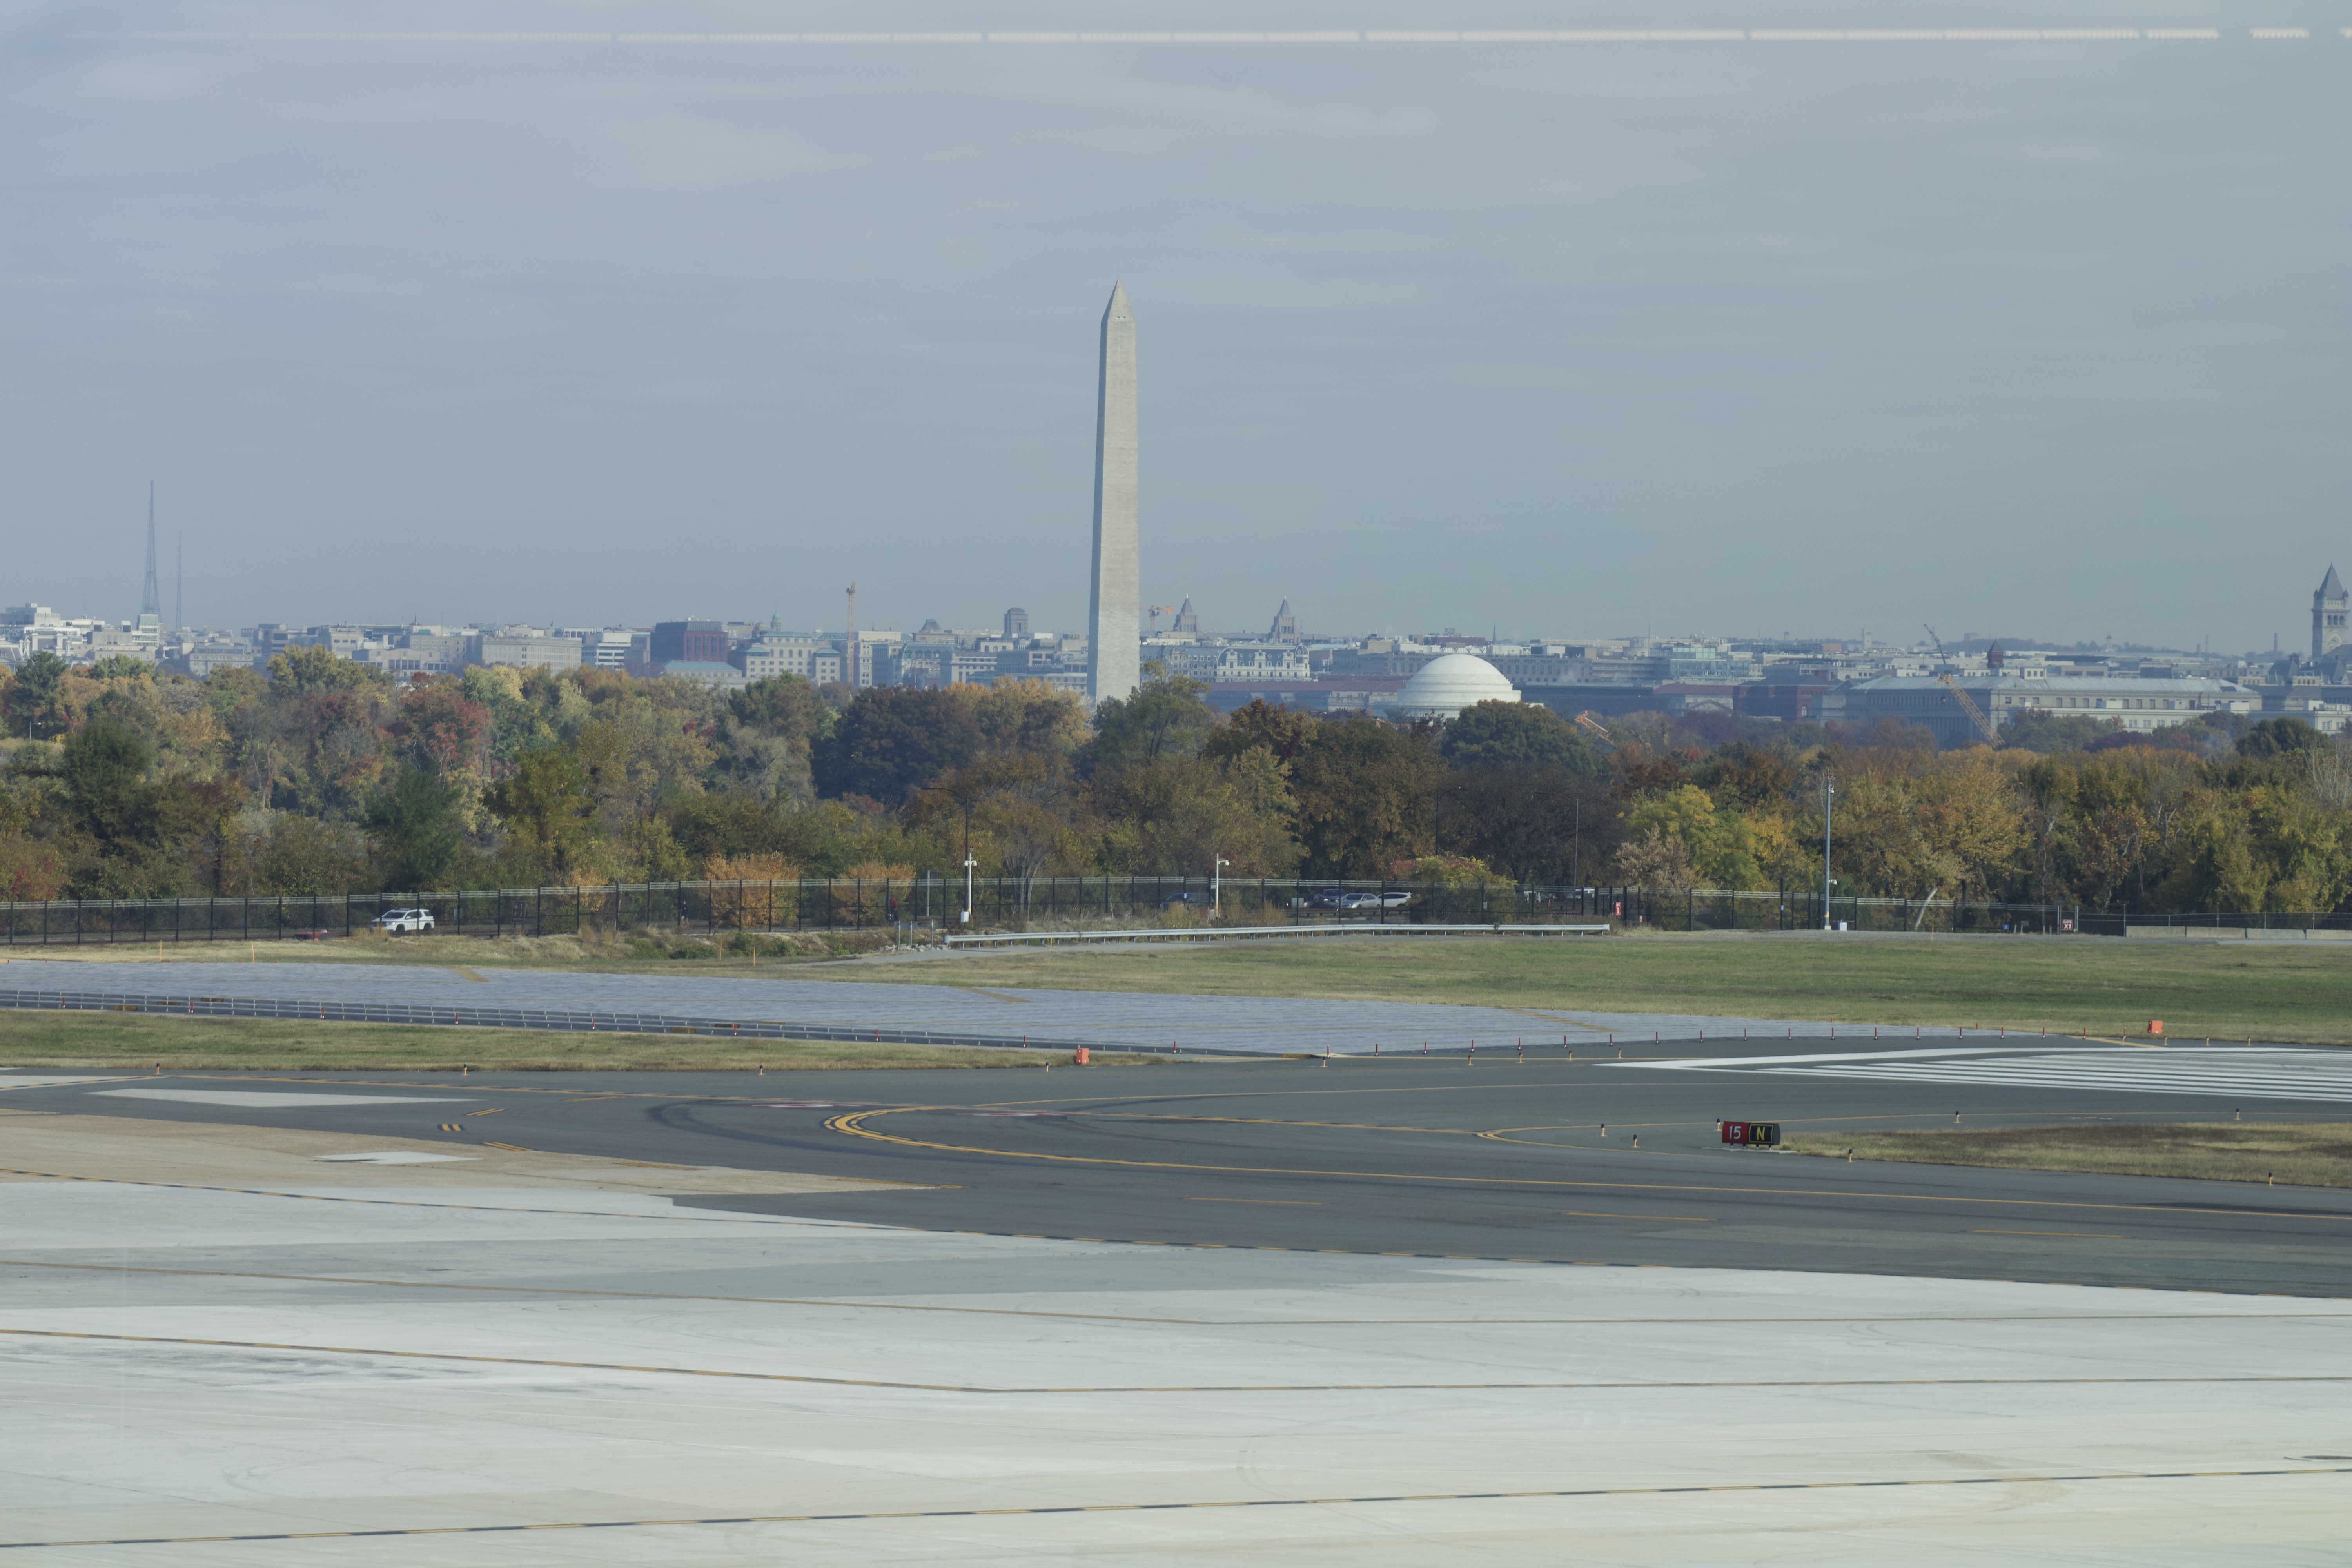 View of the north end of Washington National Airport with Washington DC in the background.